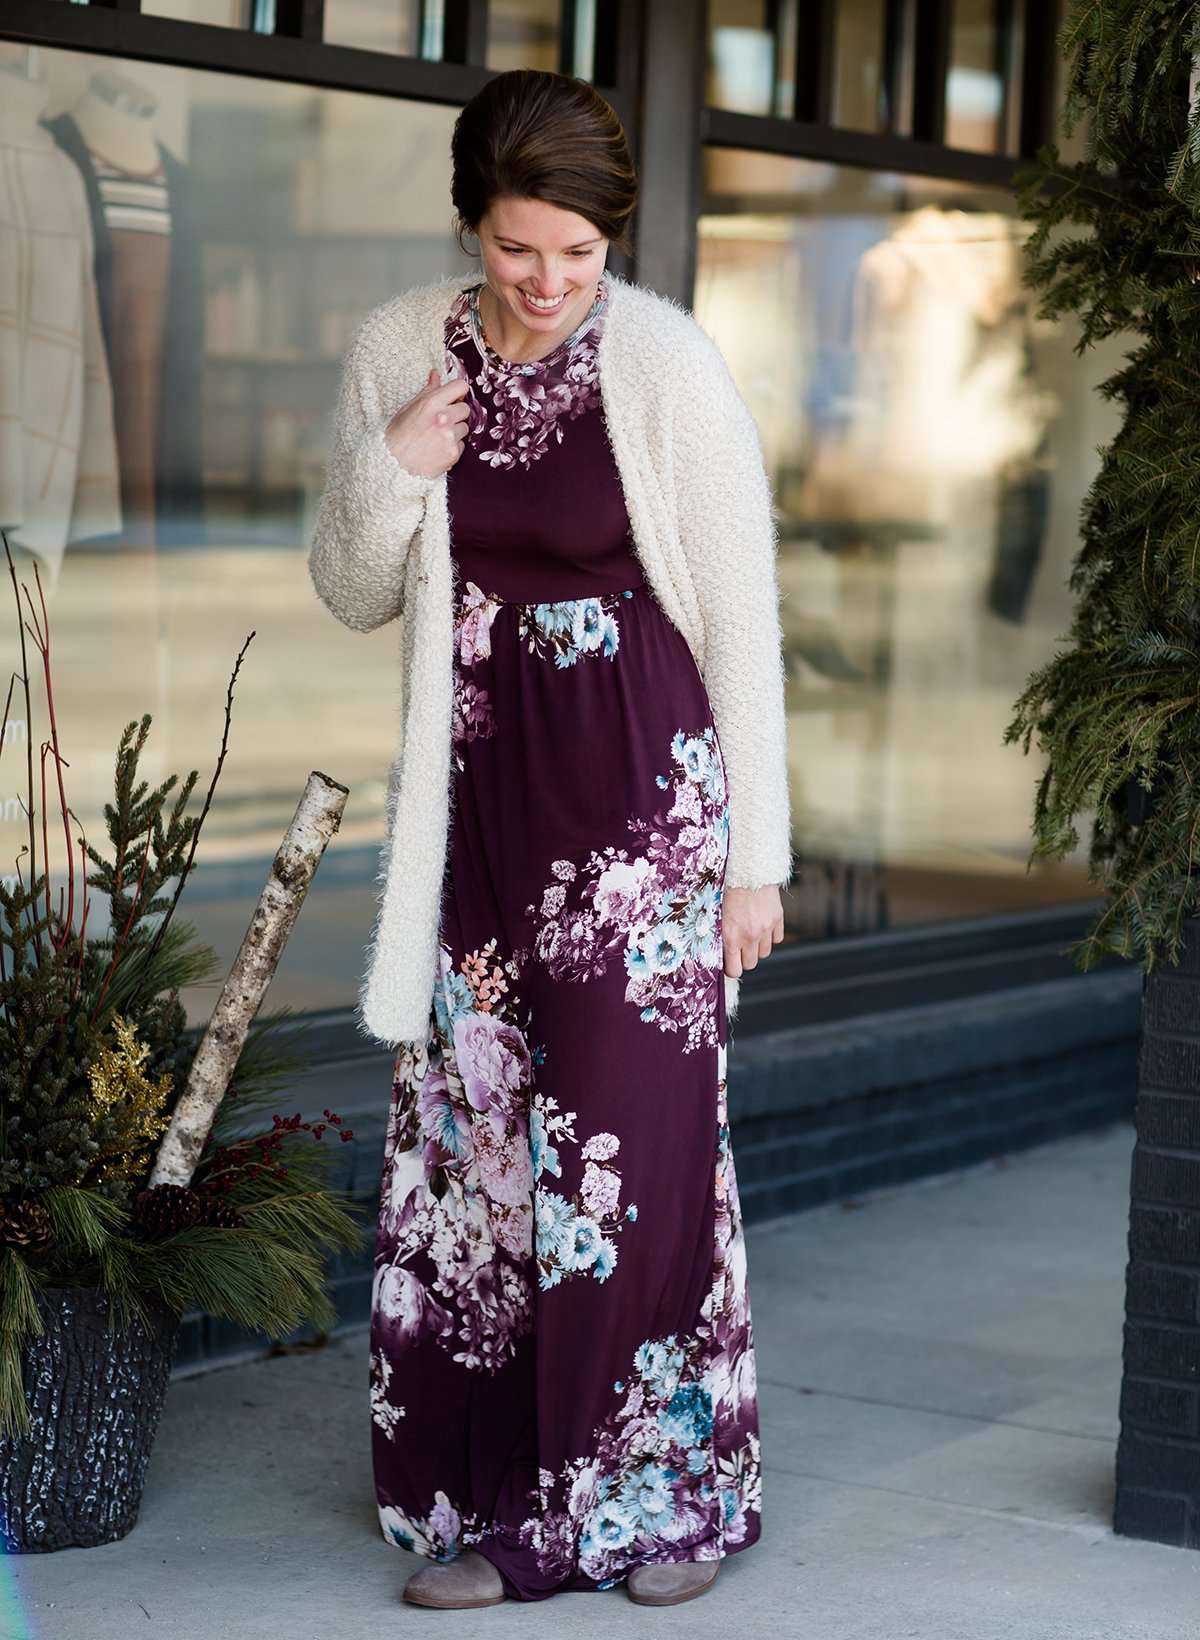 Woman wearing a modest, plum and navy maxi dress that has a elegant, floral print.